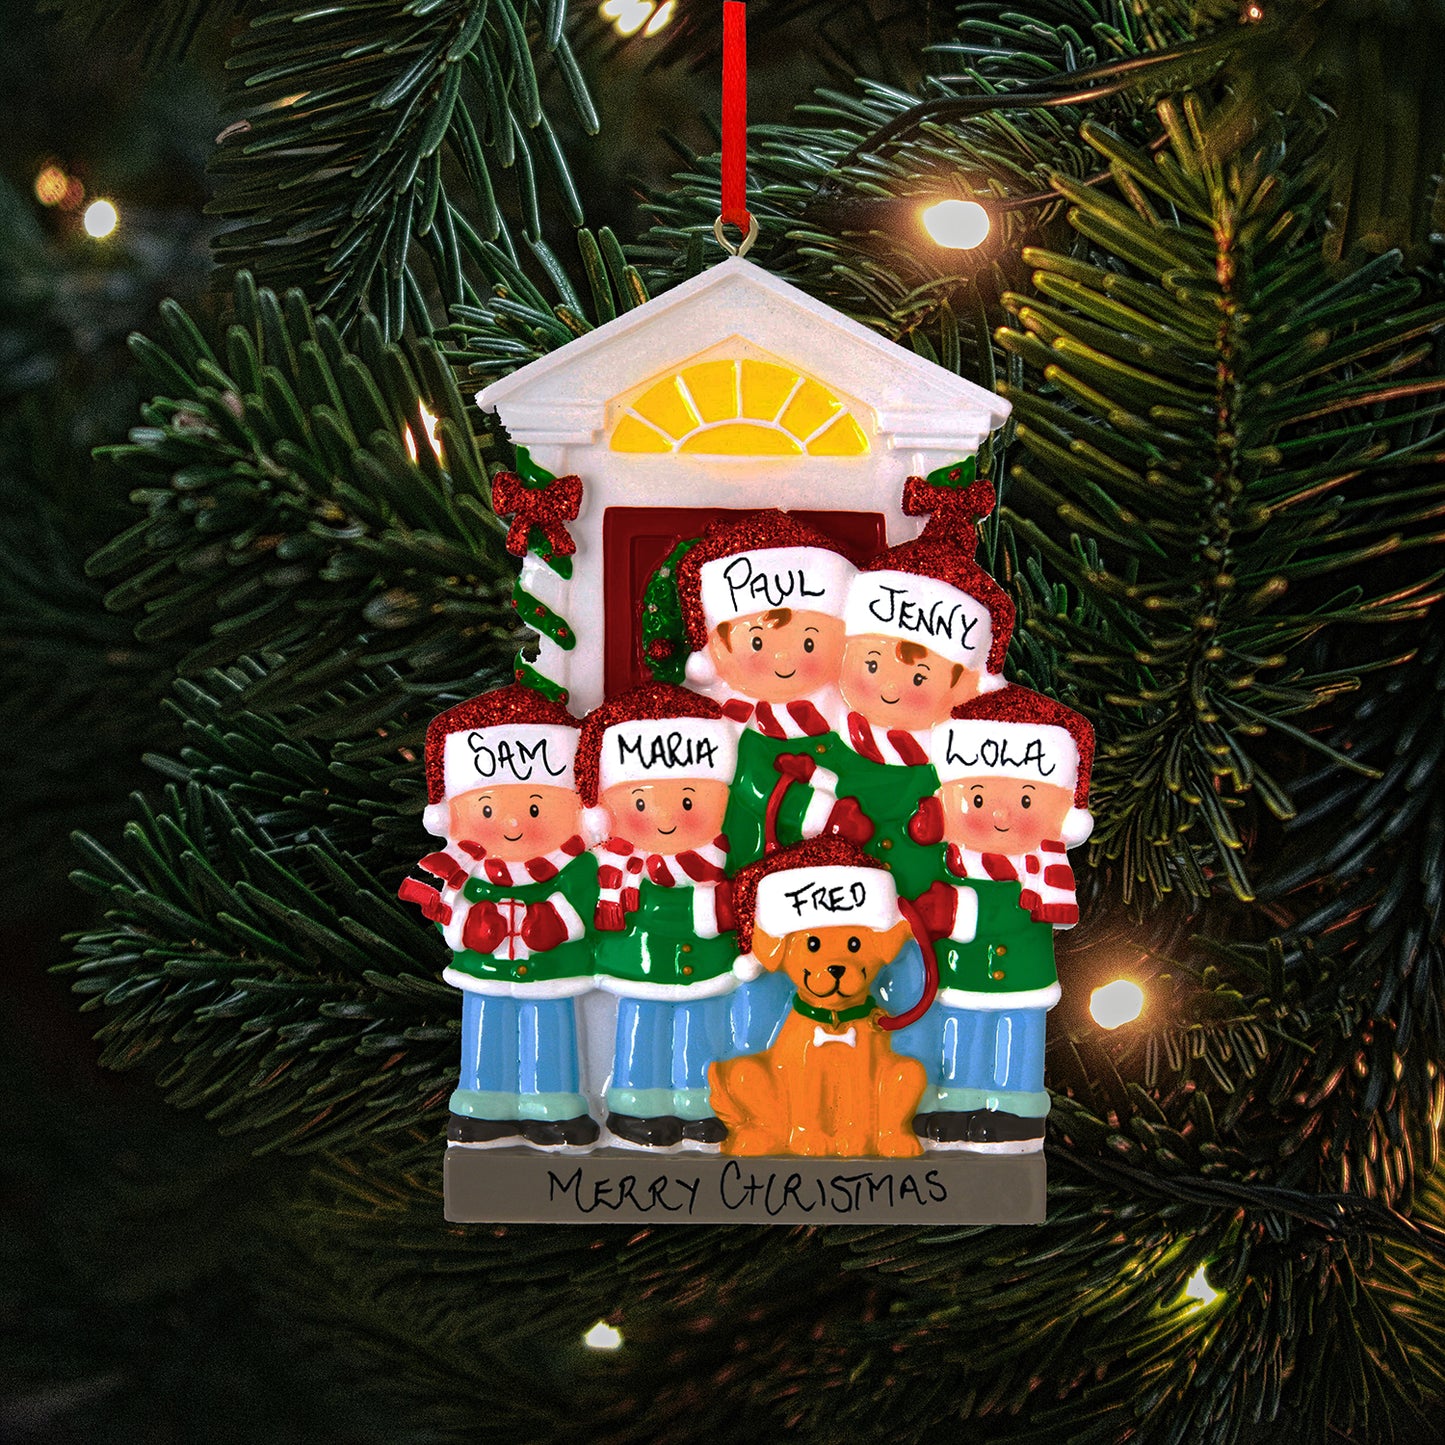 A personalized Christmas tree ornament depicting a family of five with their dog in front of a house, labeled 'Paul', 'Jenny', 'Sam', 'Maria', 'Lola', and 'Fred' on the dog's Santa hat, showing the personalisable capabilities of the ornament. The festive decoration includes a handwritten 'Merry Christmas' banner and is set against a background of a Christmas tree with lights.